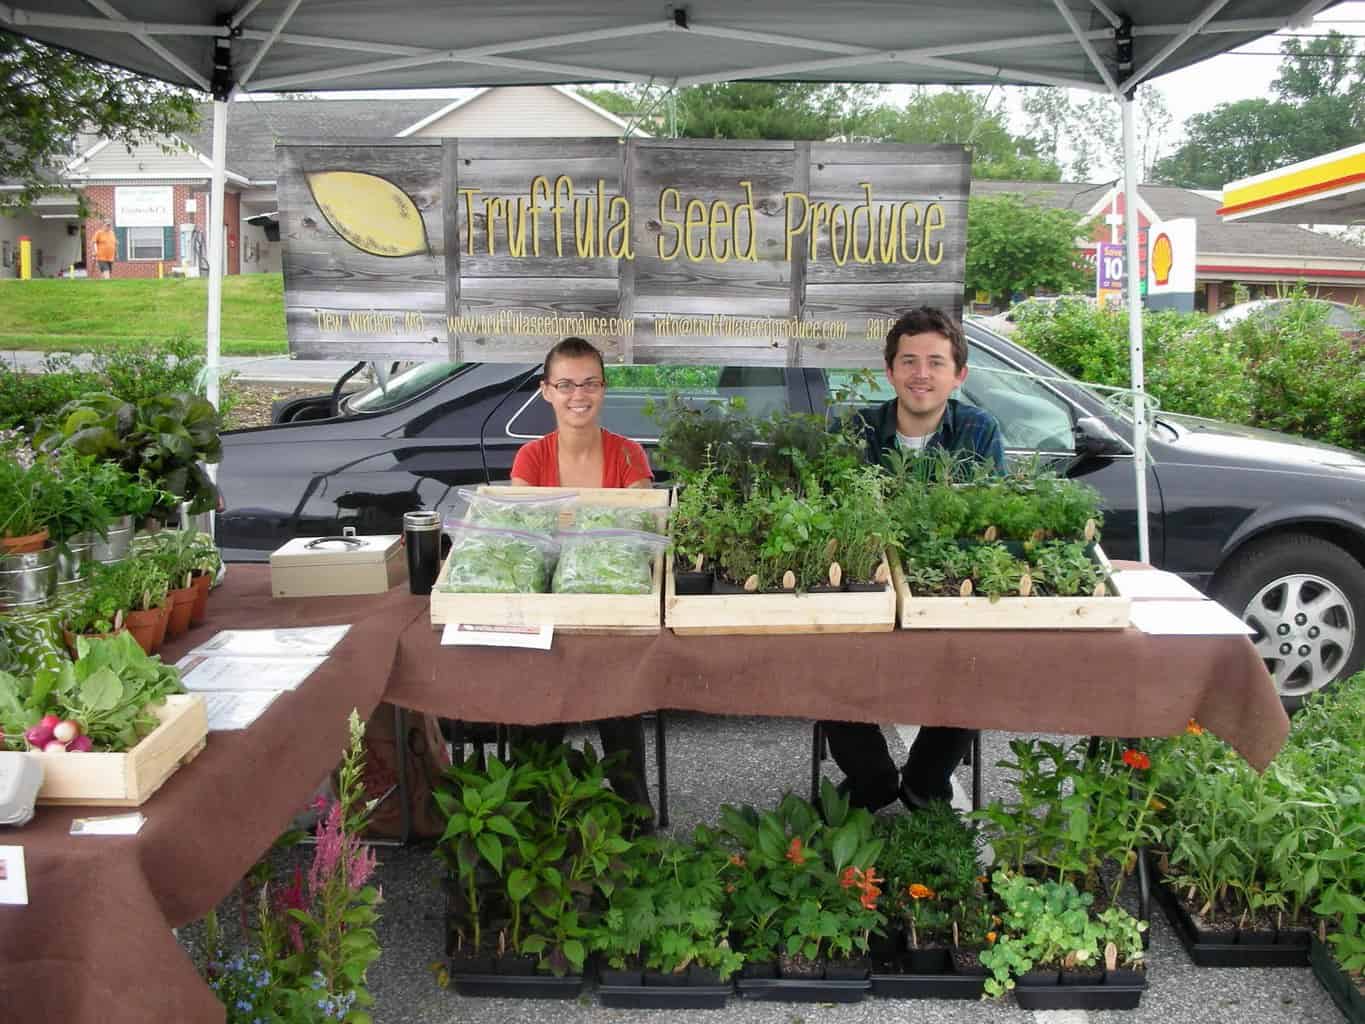 Josie and Shawn at the Farmers' Market with Truffula Seed Produce